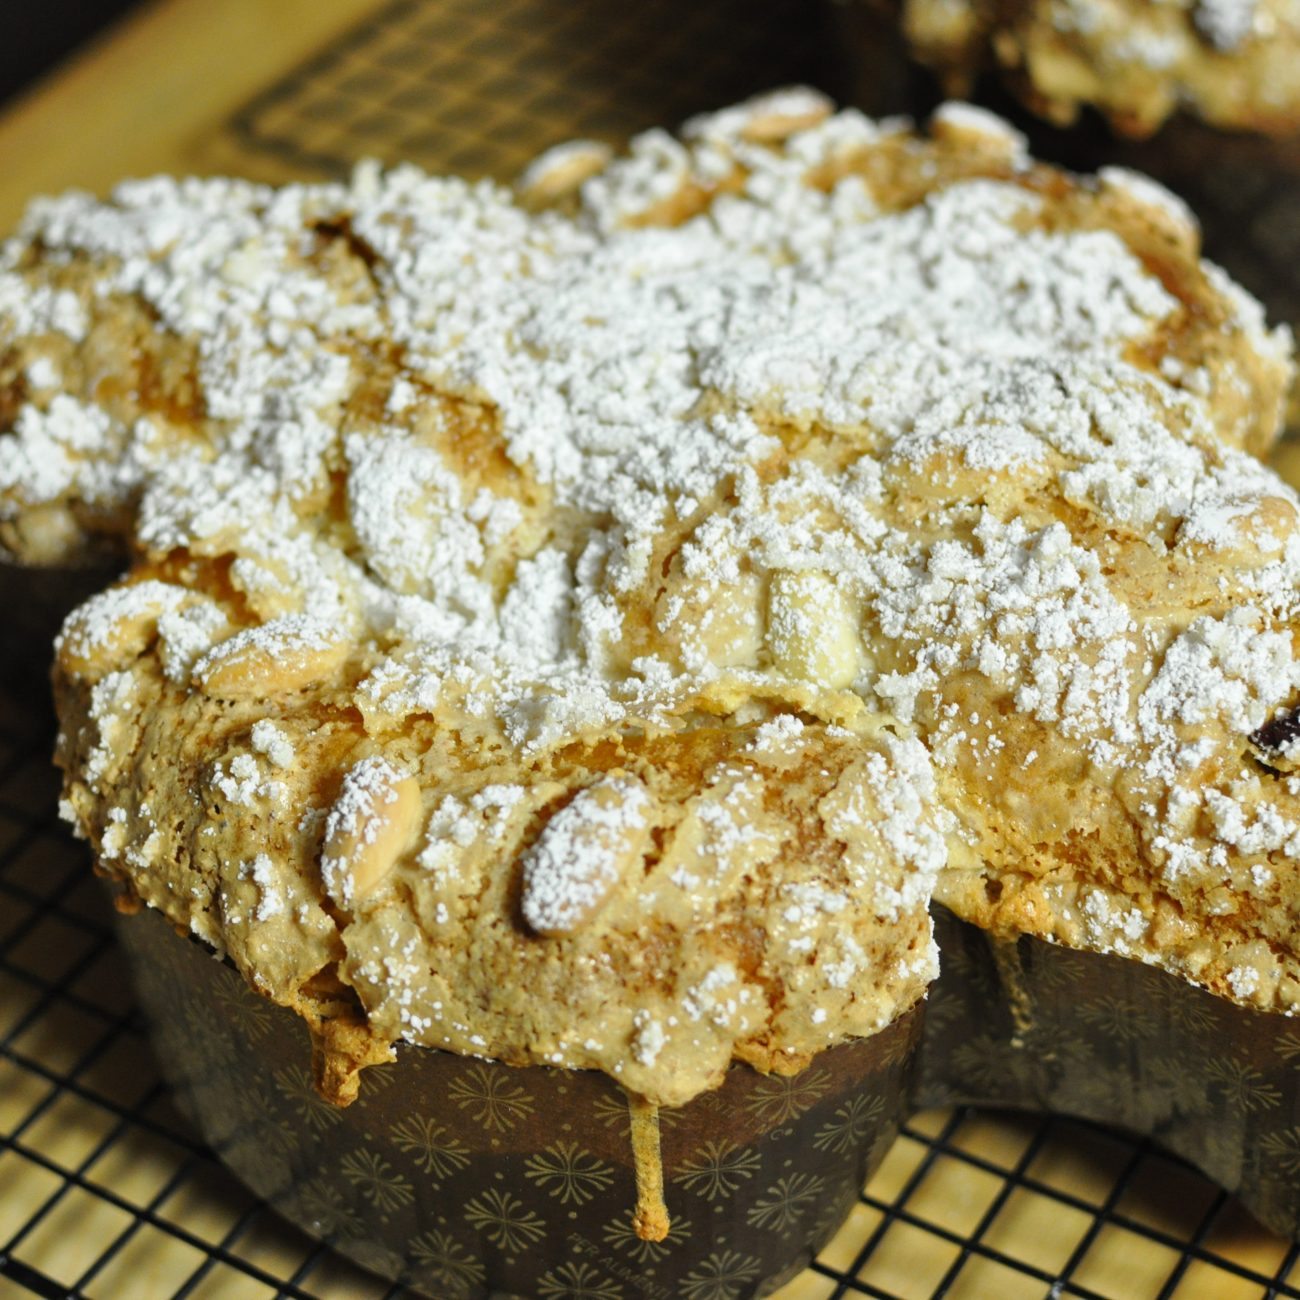 Recipe for Easter Colomba cake with yeast